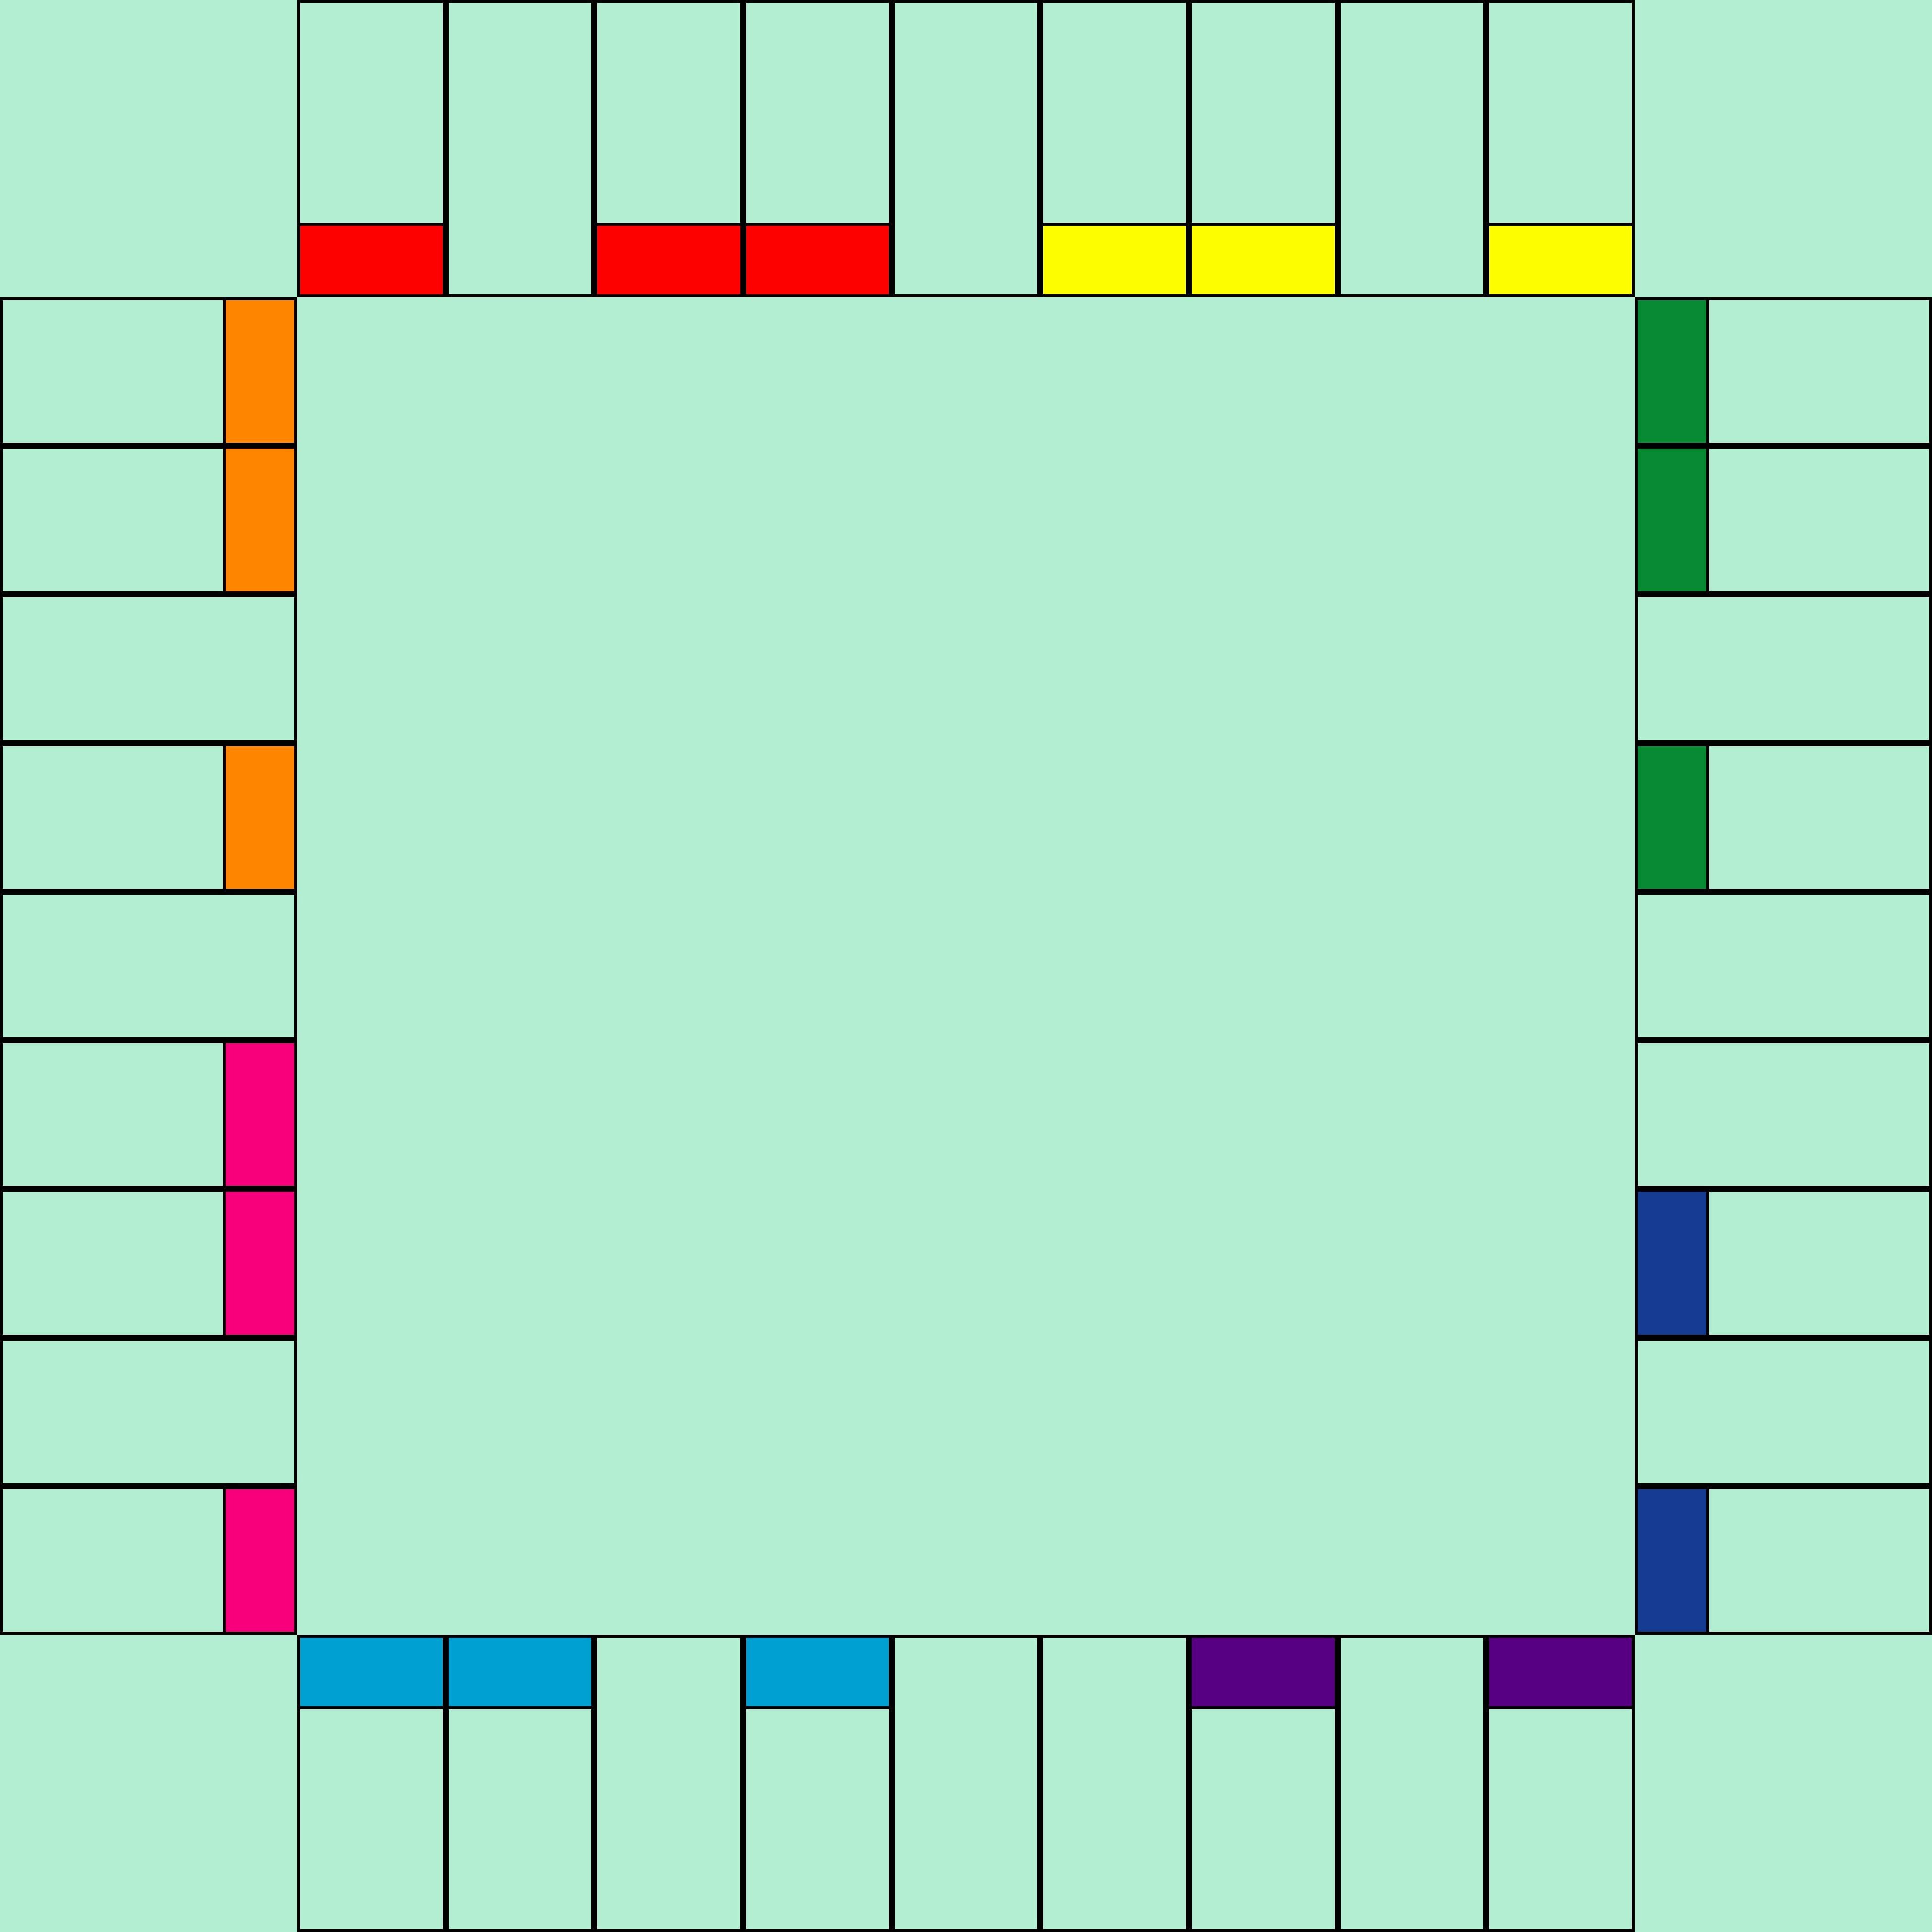 Blank Board Game Template Awesome Blank Board Could We Use This